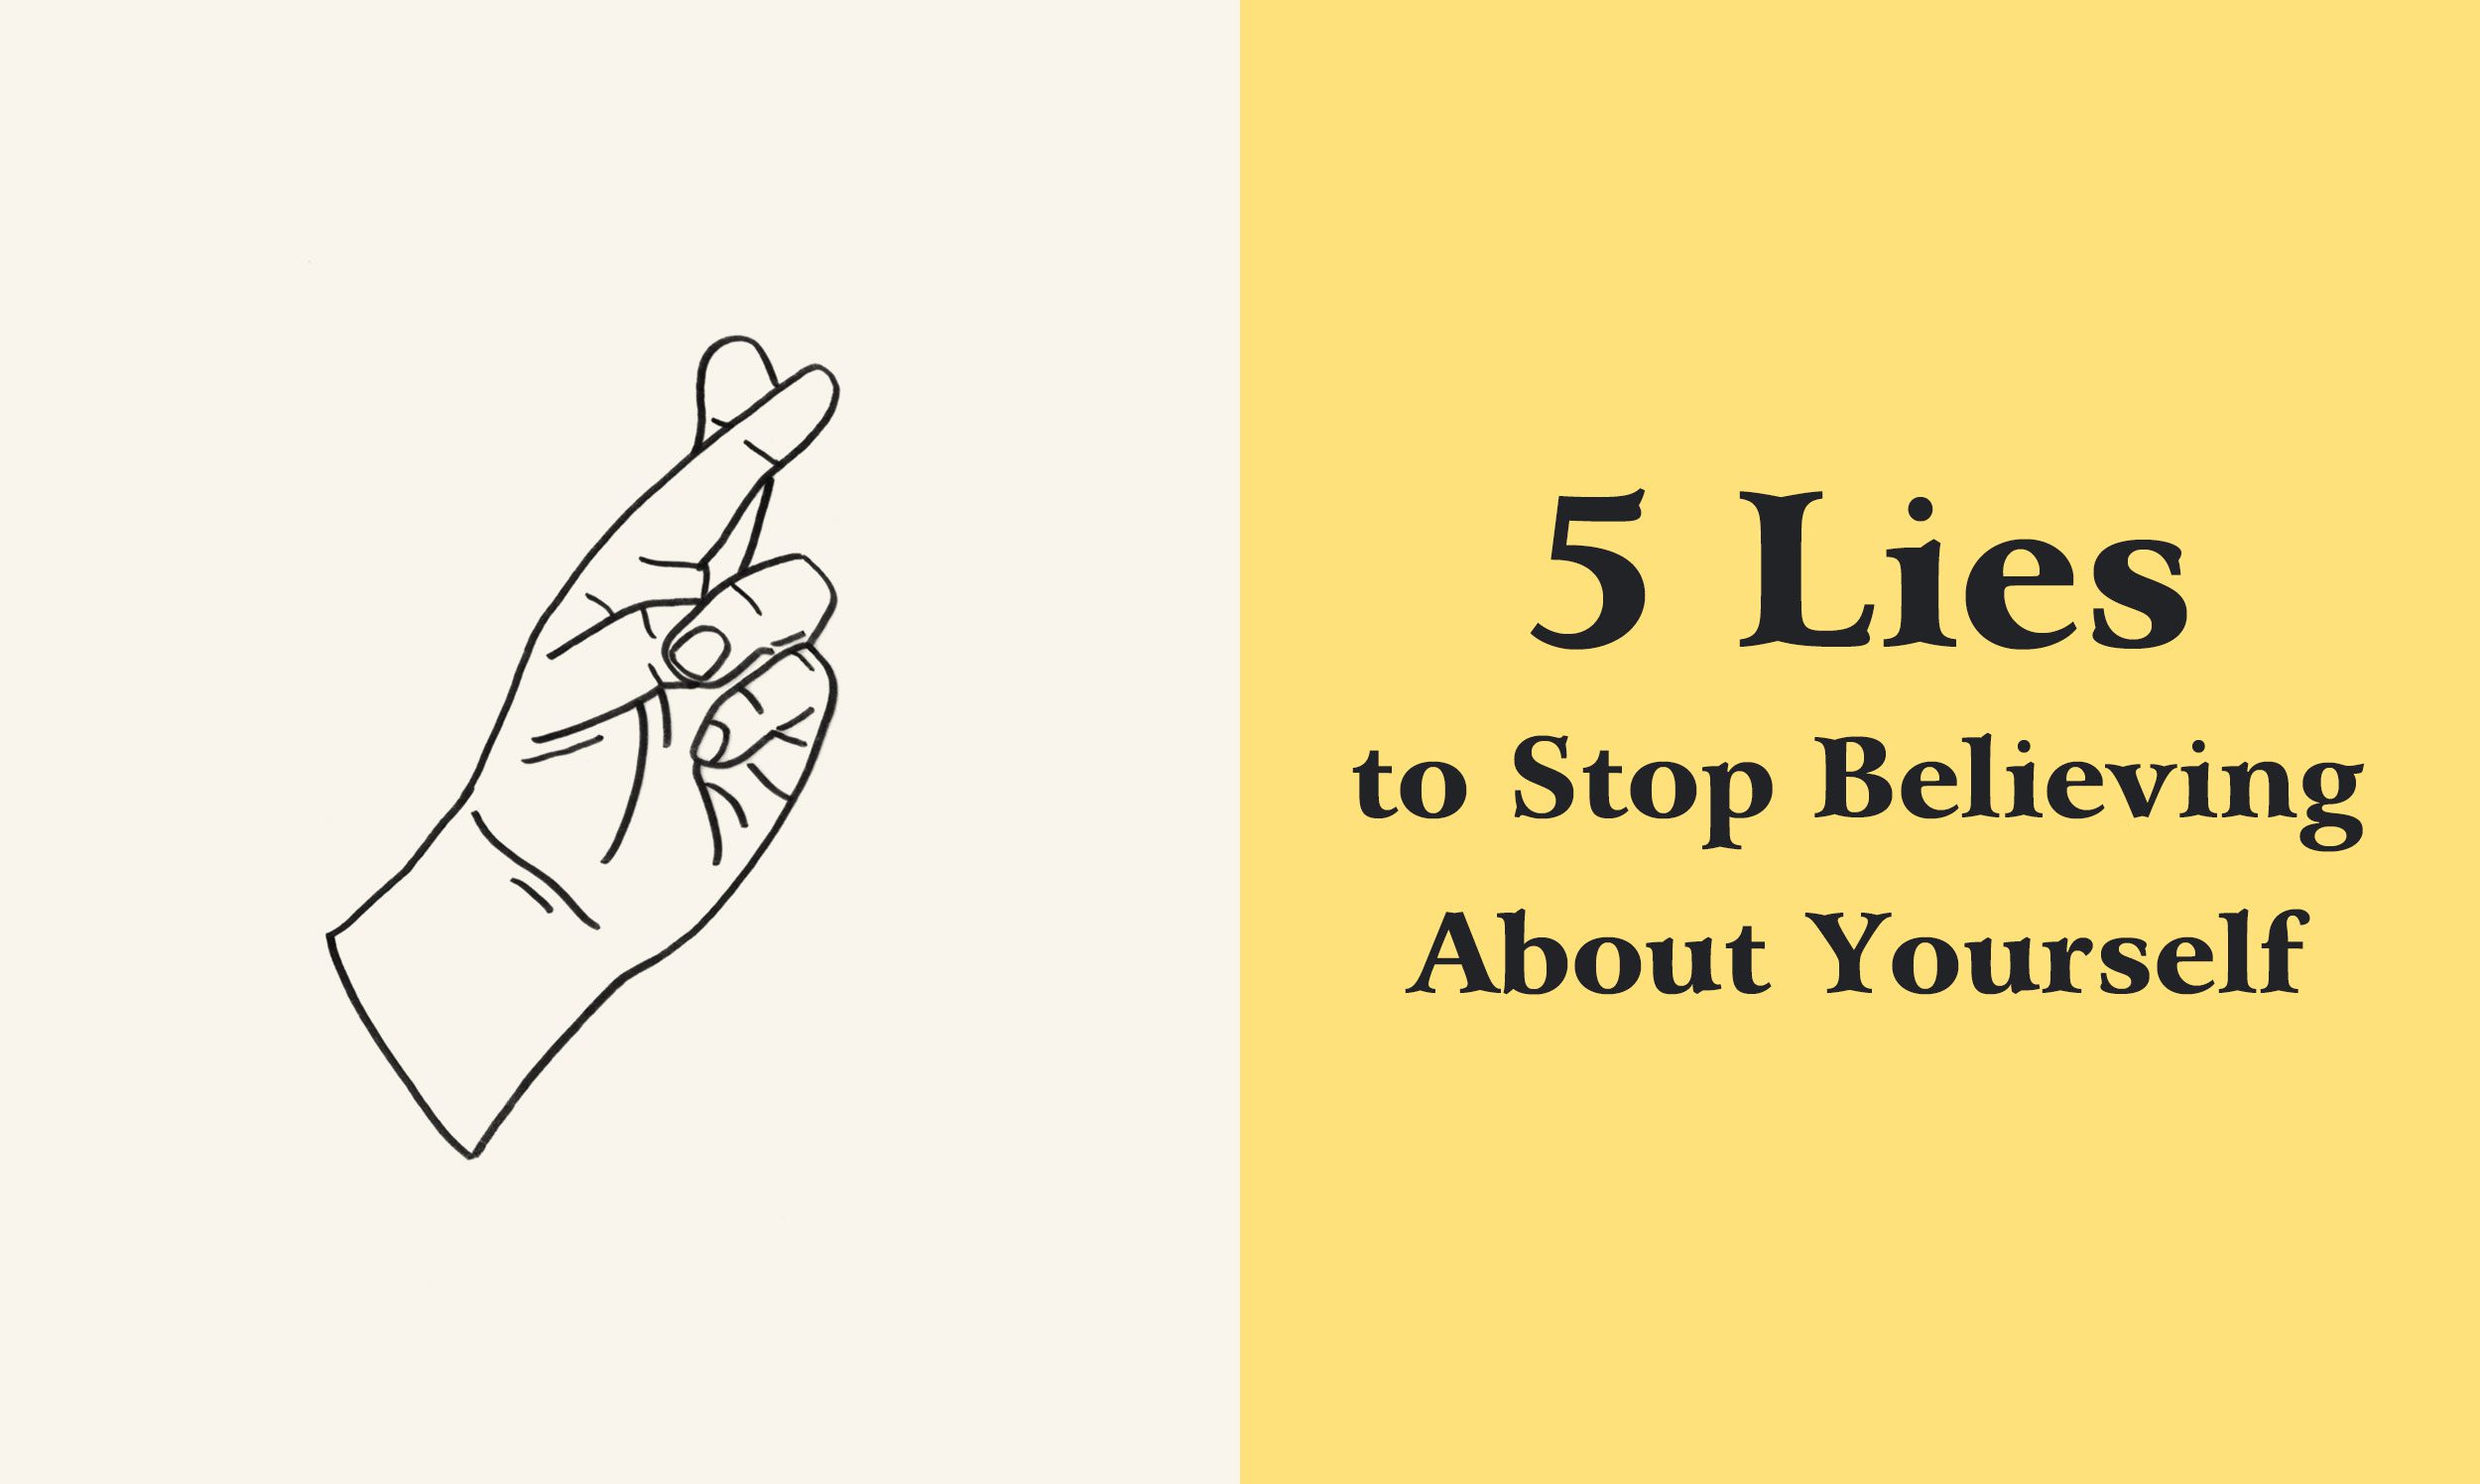 5 Lies to Stop Believing About Yourself